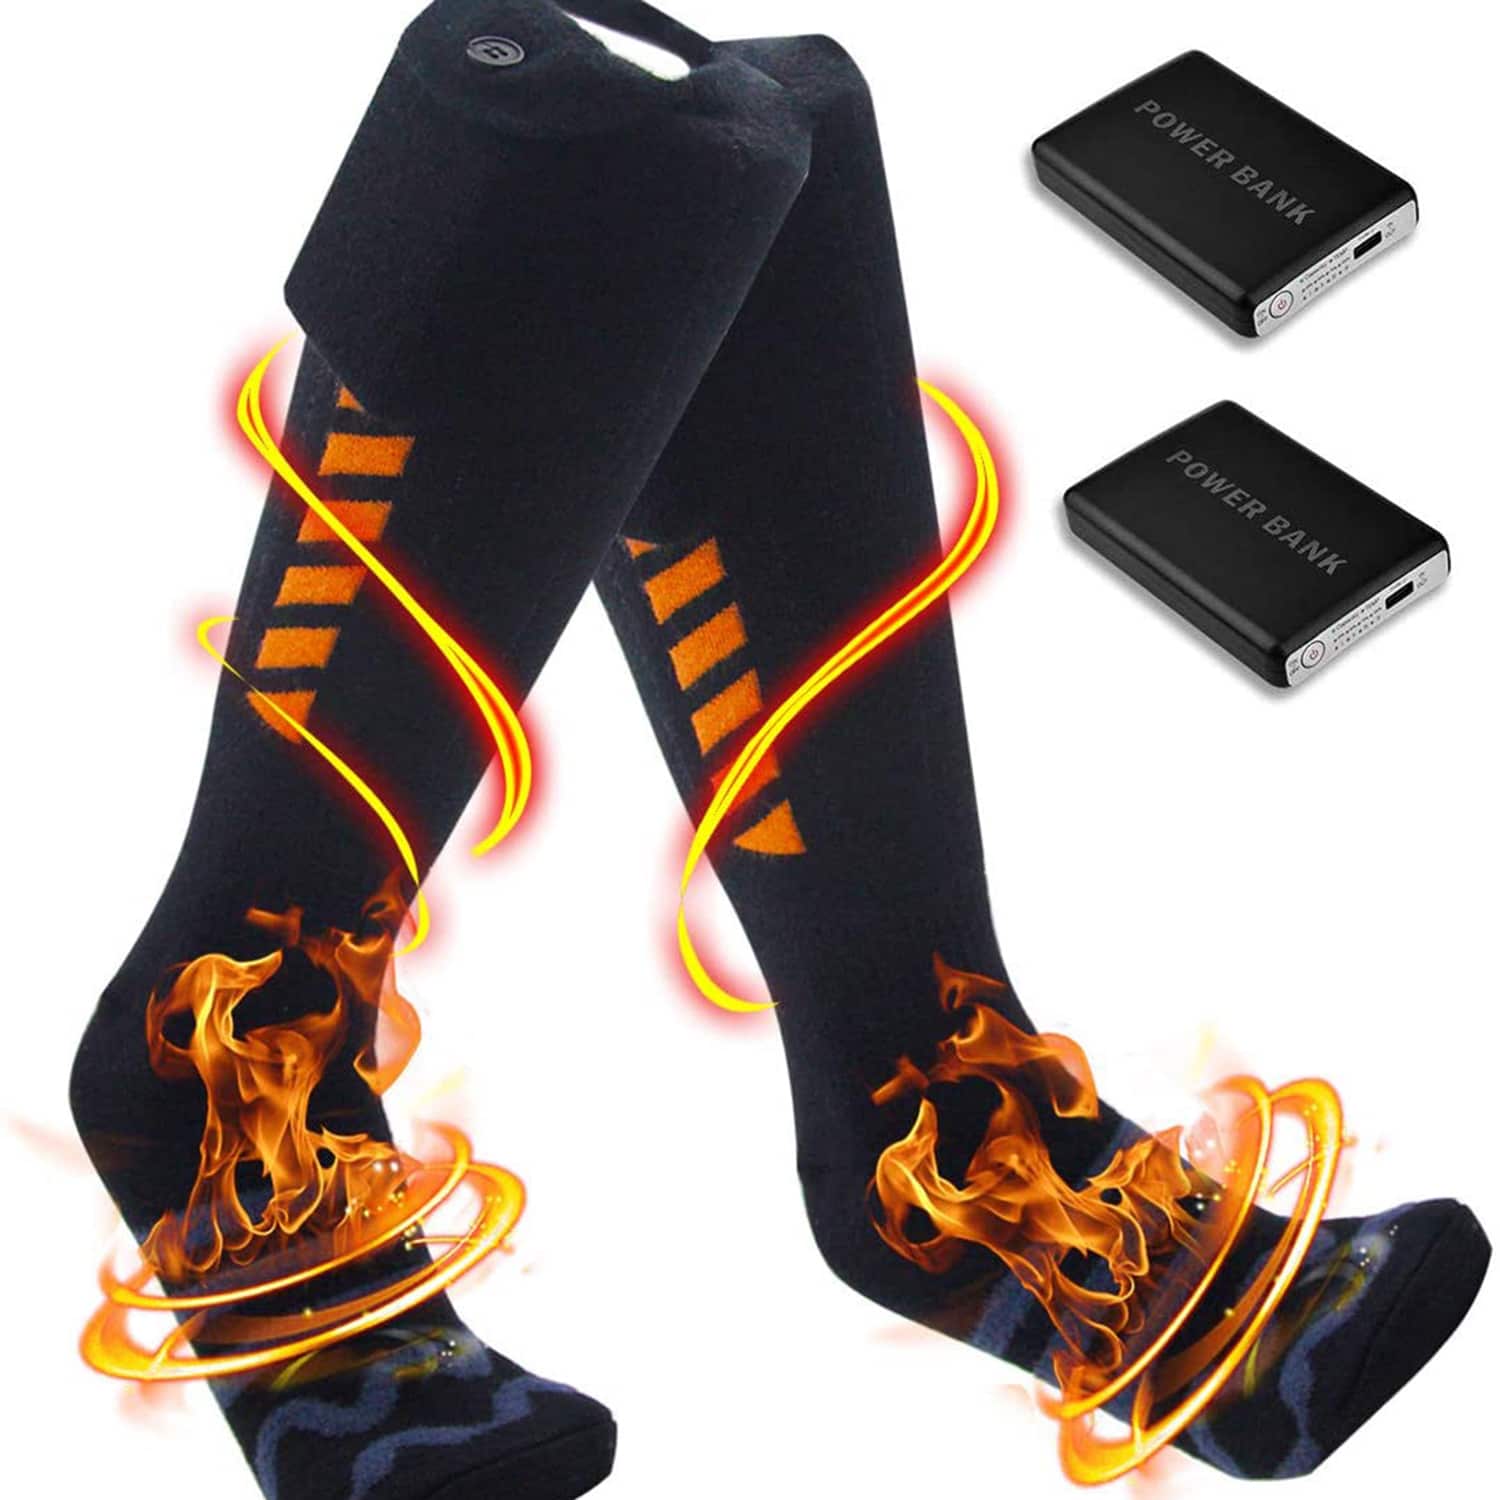 Best Rechargeable Heated Socks for Men And Women in 2022